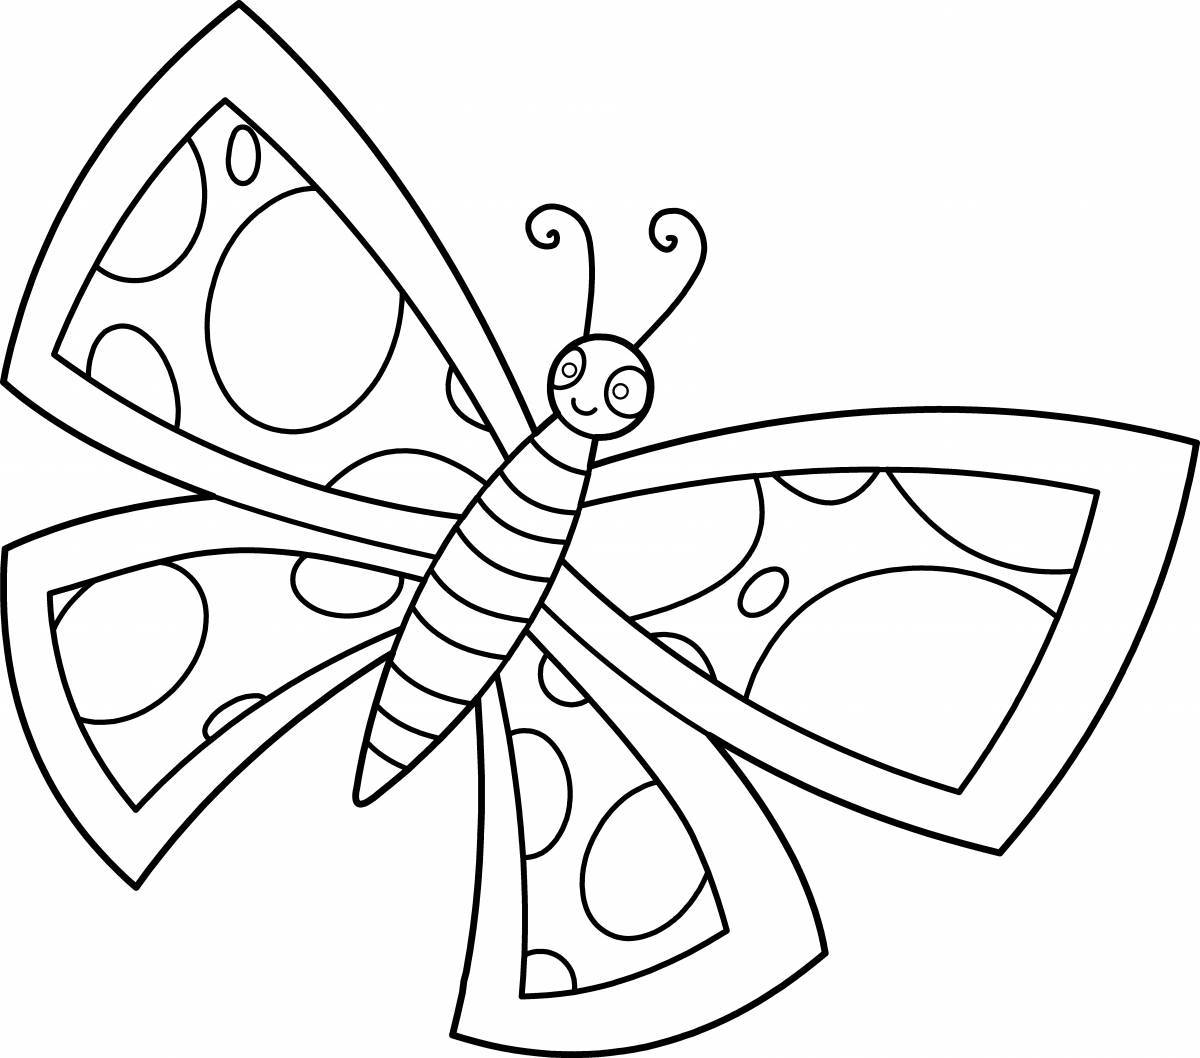 Colorific butterfly coloring page для детей 3-4 лет